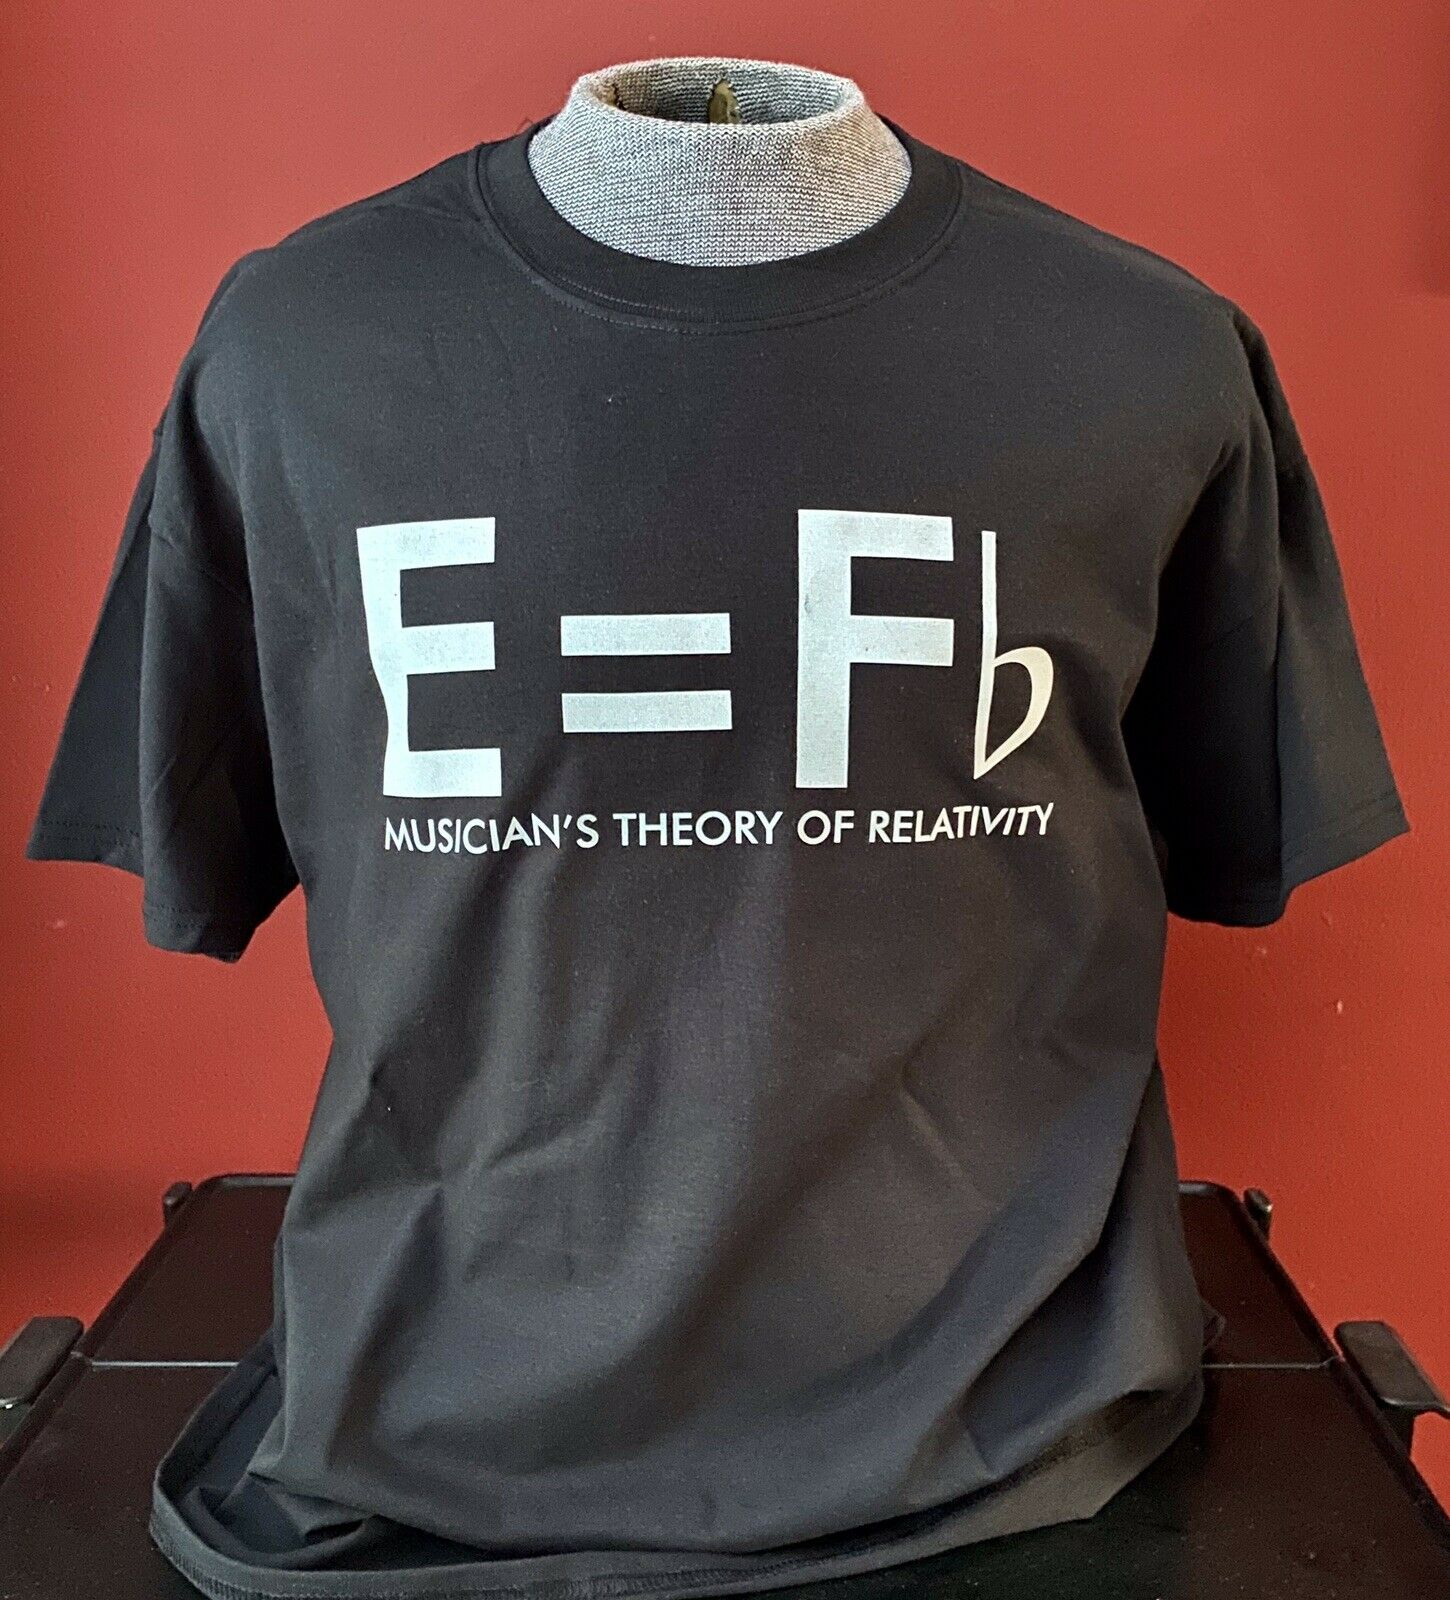 E = Fb Theory Of Relativity Guitar  T-shirt Size Xl And All Other Sizes